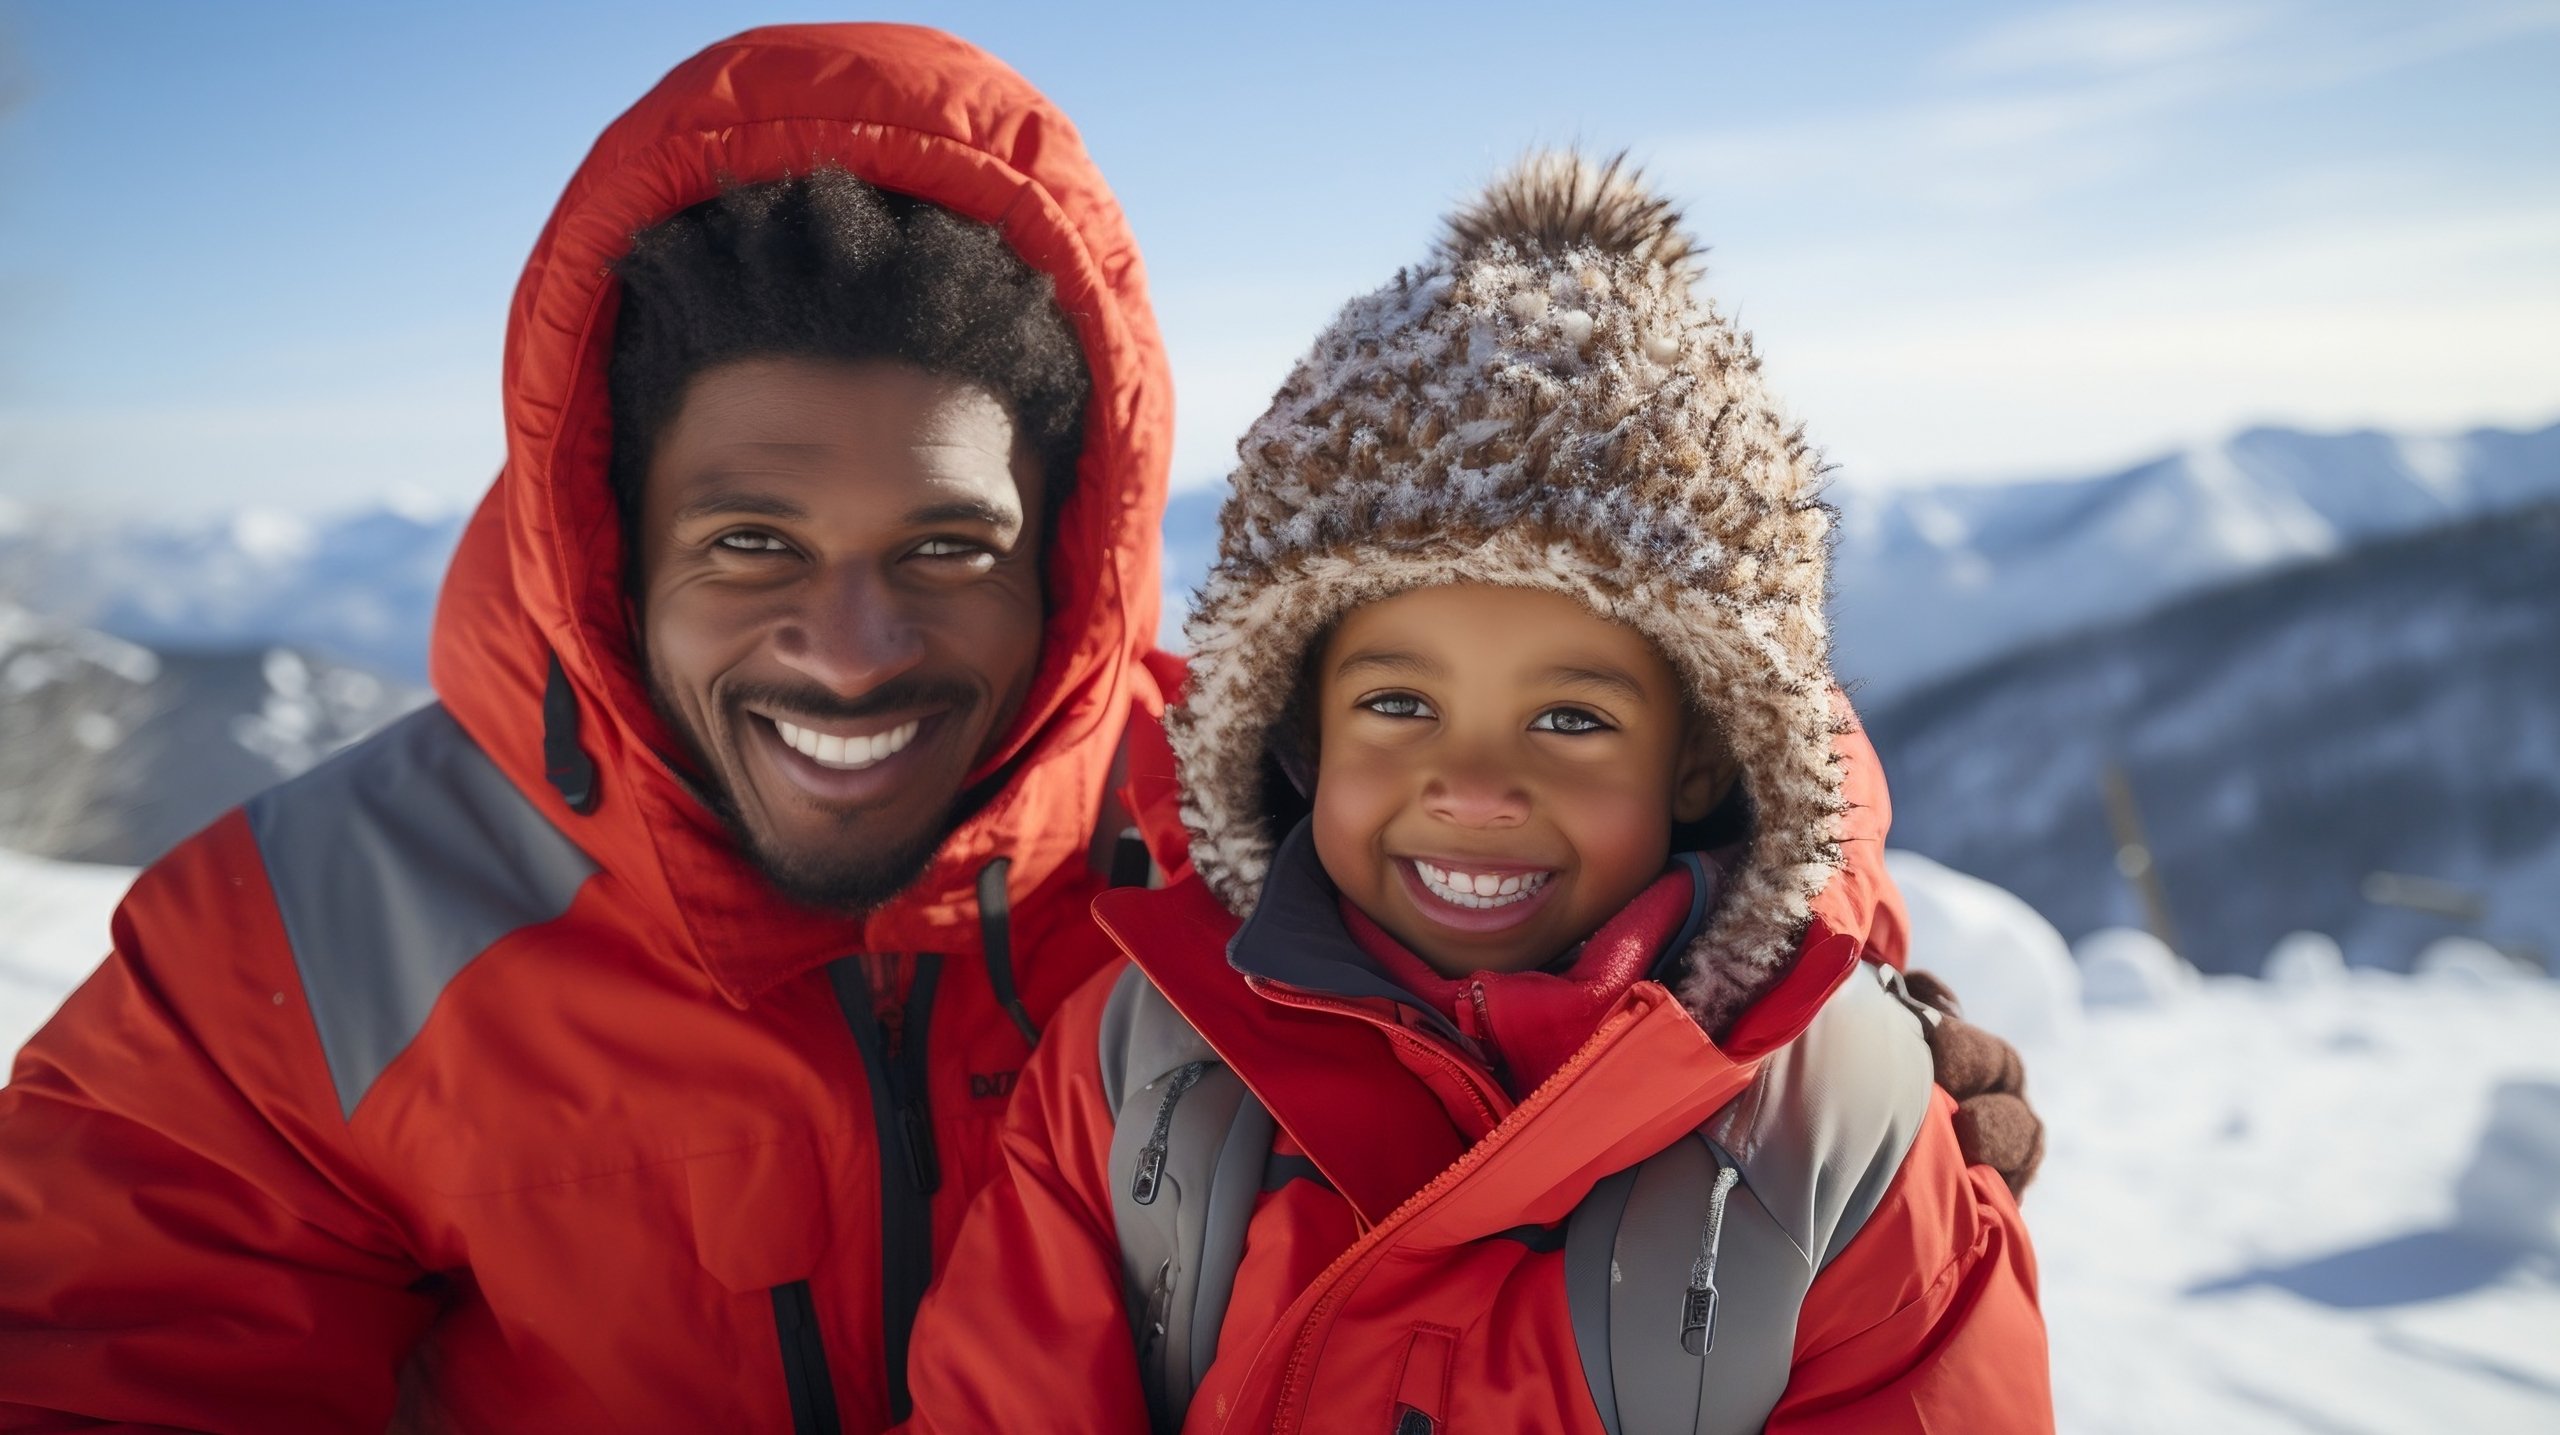 A man and a child on snowy mountains